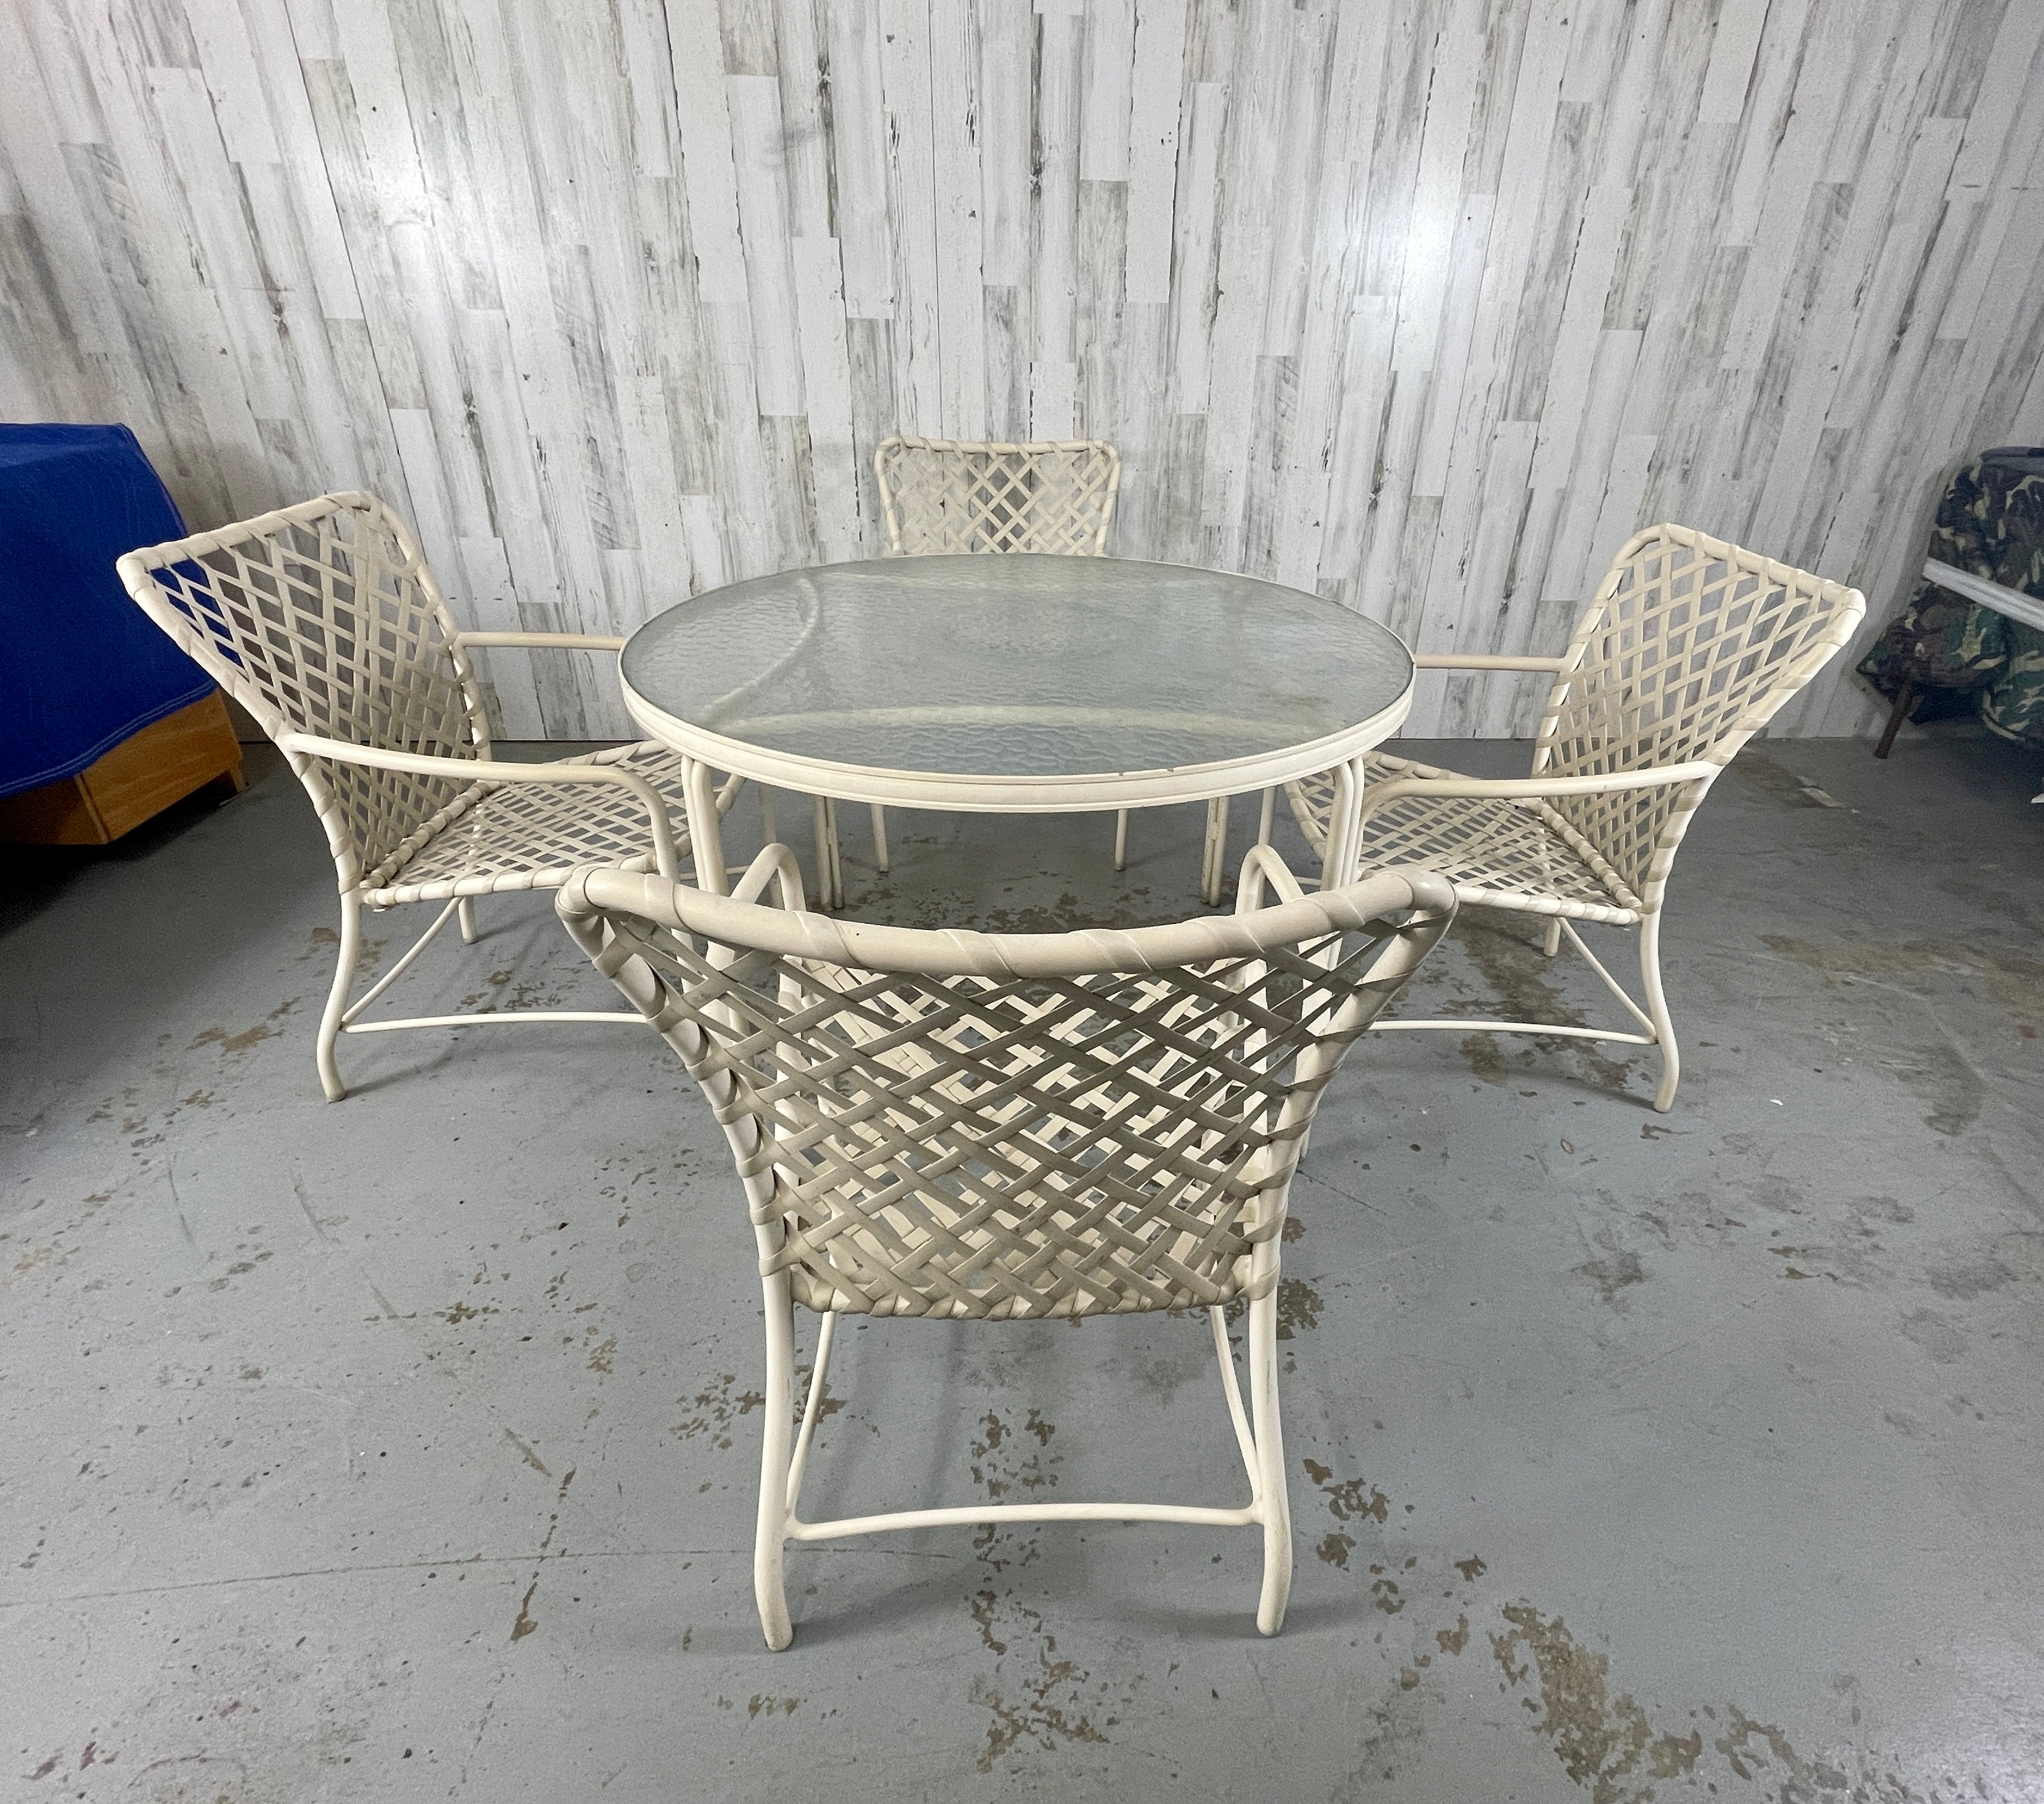 Brown Jordan Tamiami 5 Piece Patio Set. 1 round table and 4 armchairs designed and manufactured by Brown Jordan from the Tamiami Collection. Original Tan colored aluminum and strapping. The straps are sturdy and ready for use.

Table Measurements: